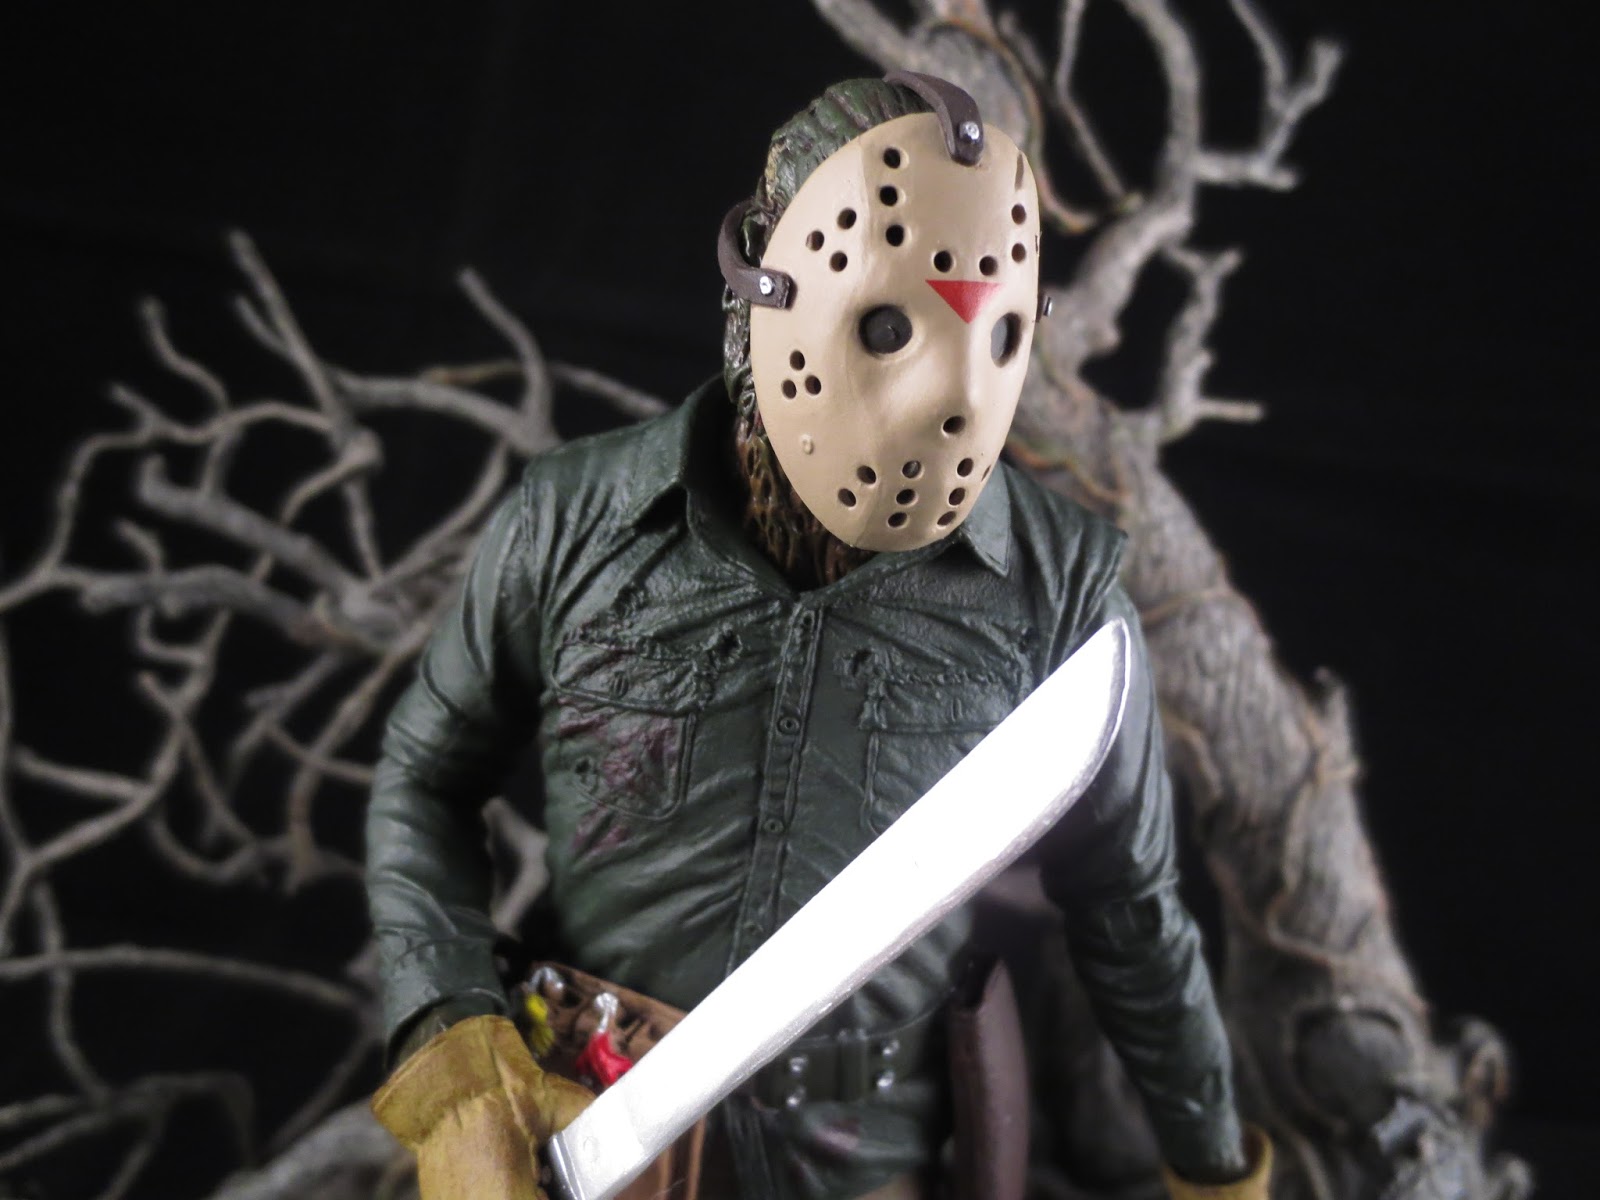 Action Figure Barbecue: Action Figure Review: Ultimate Jason Voorhees ( Friday the 13th Part VI: Jason Lives) from Friday the 13th